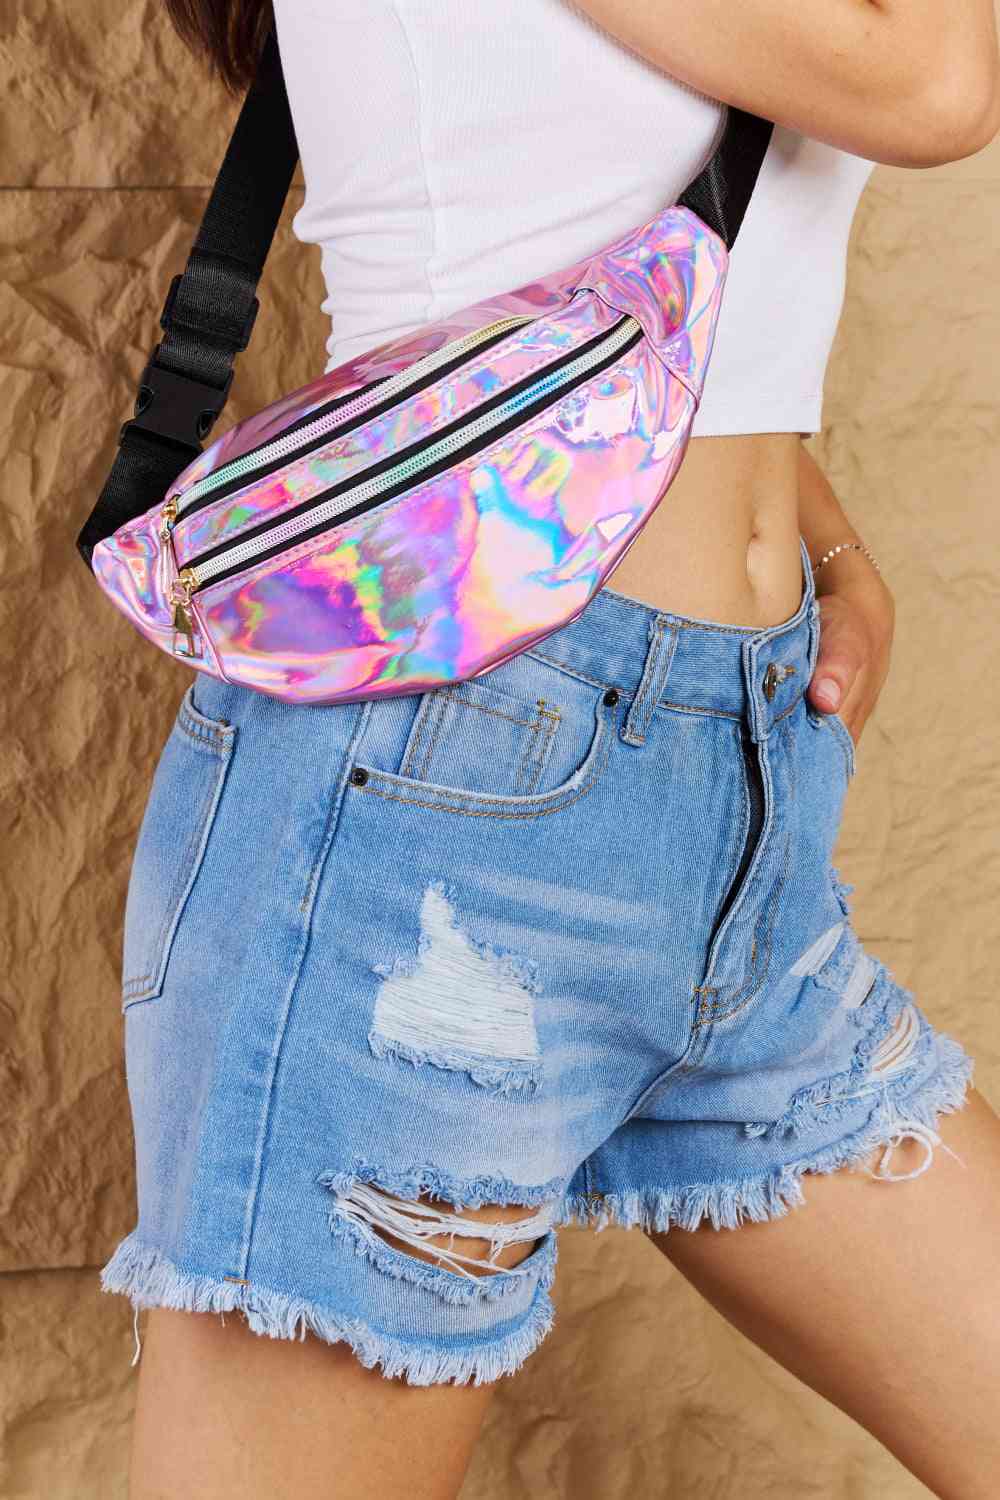 Holographic Neon Pink Fanny Pack Crossbody